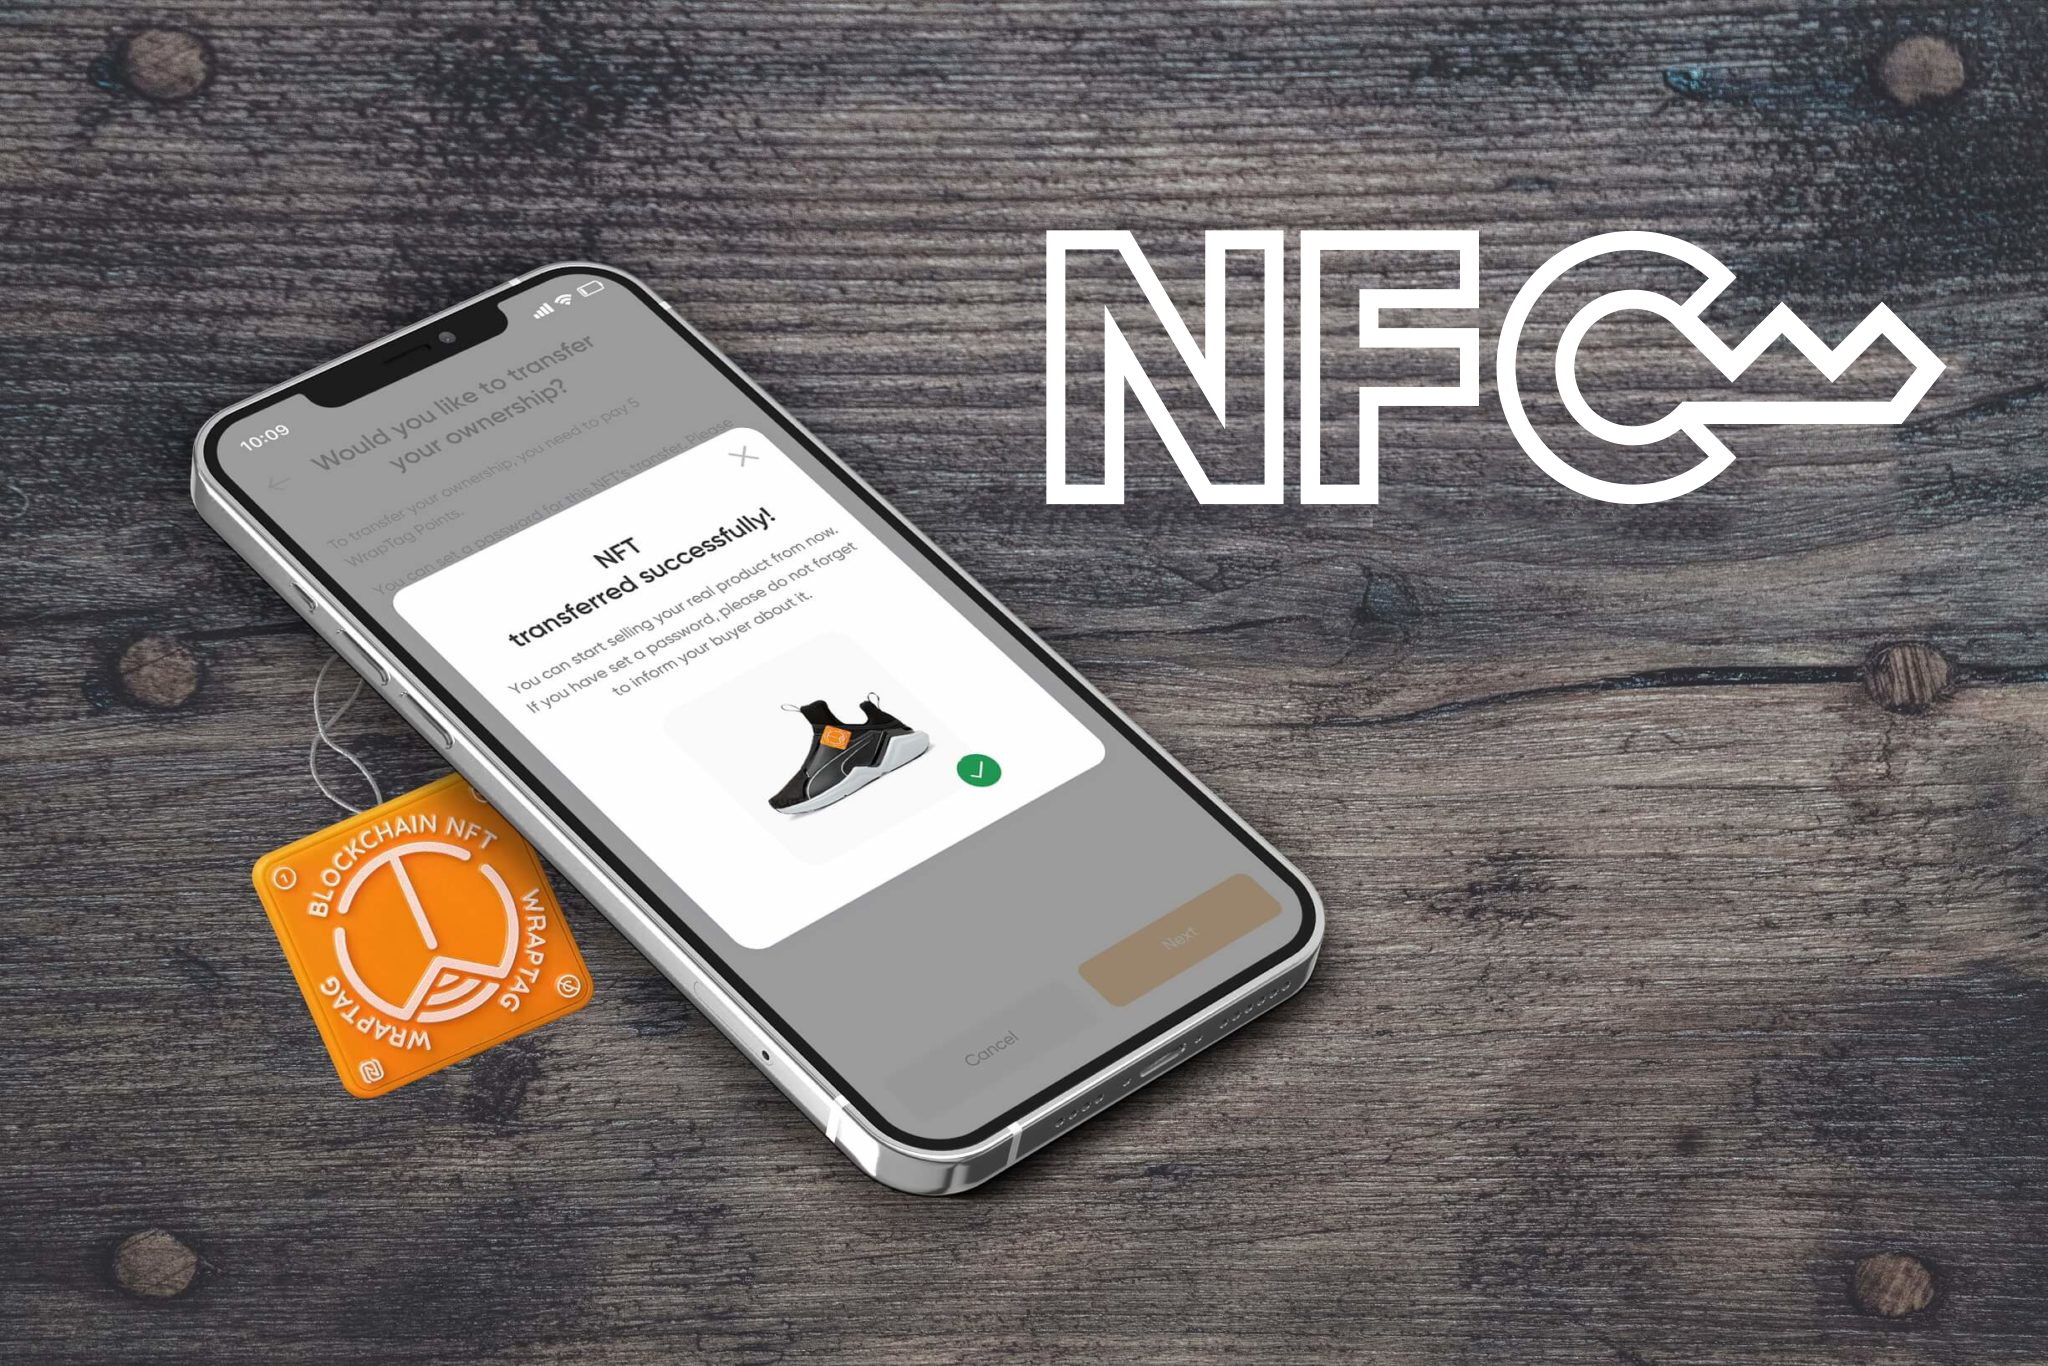 What is NFC Tag? Where to buy NFC Tags?